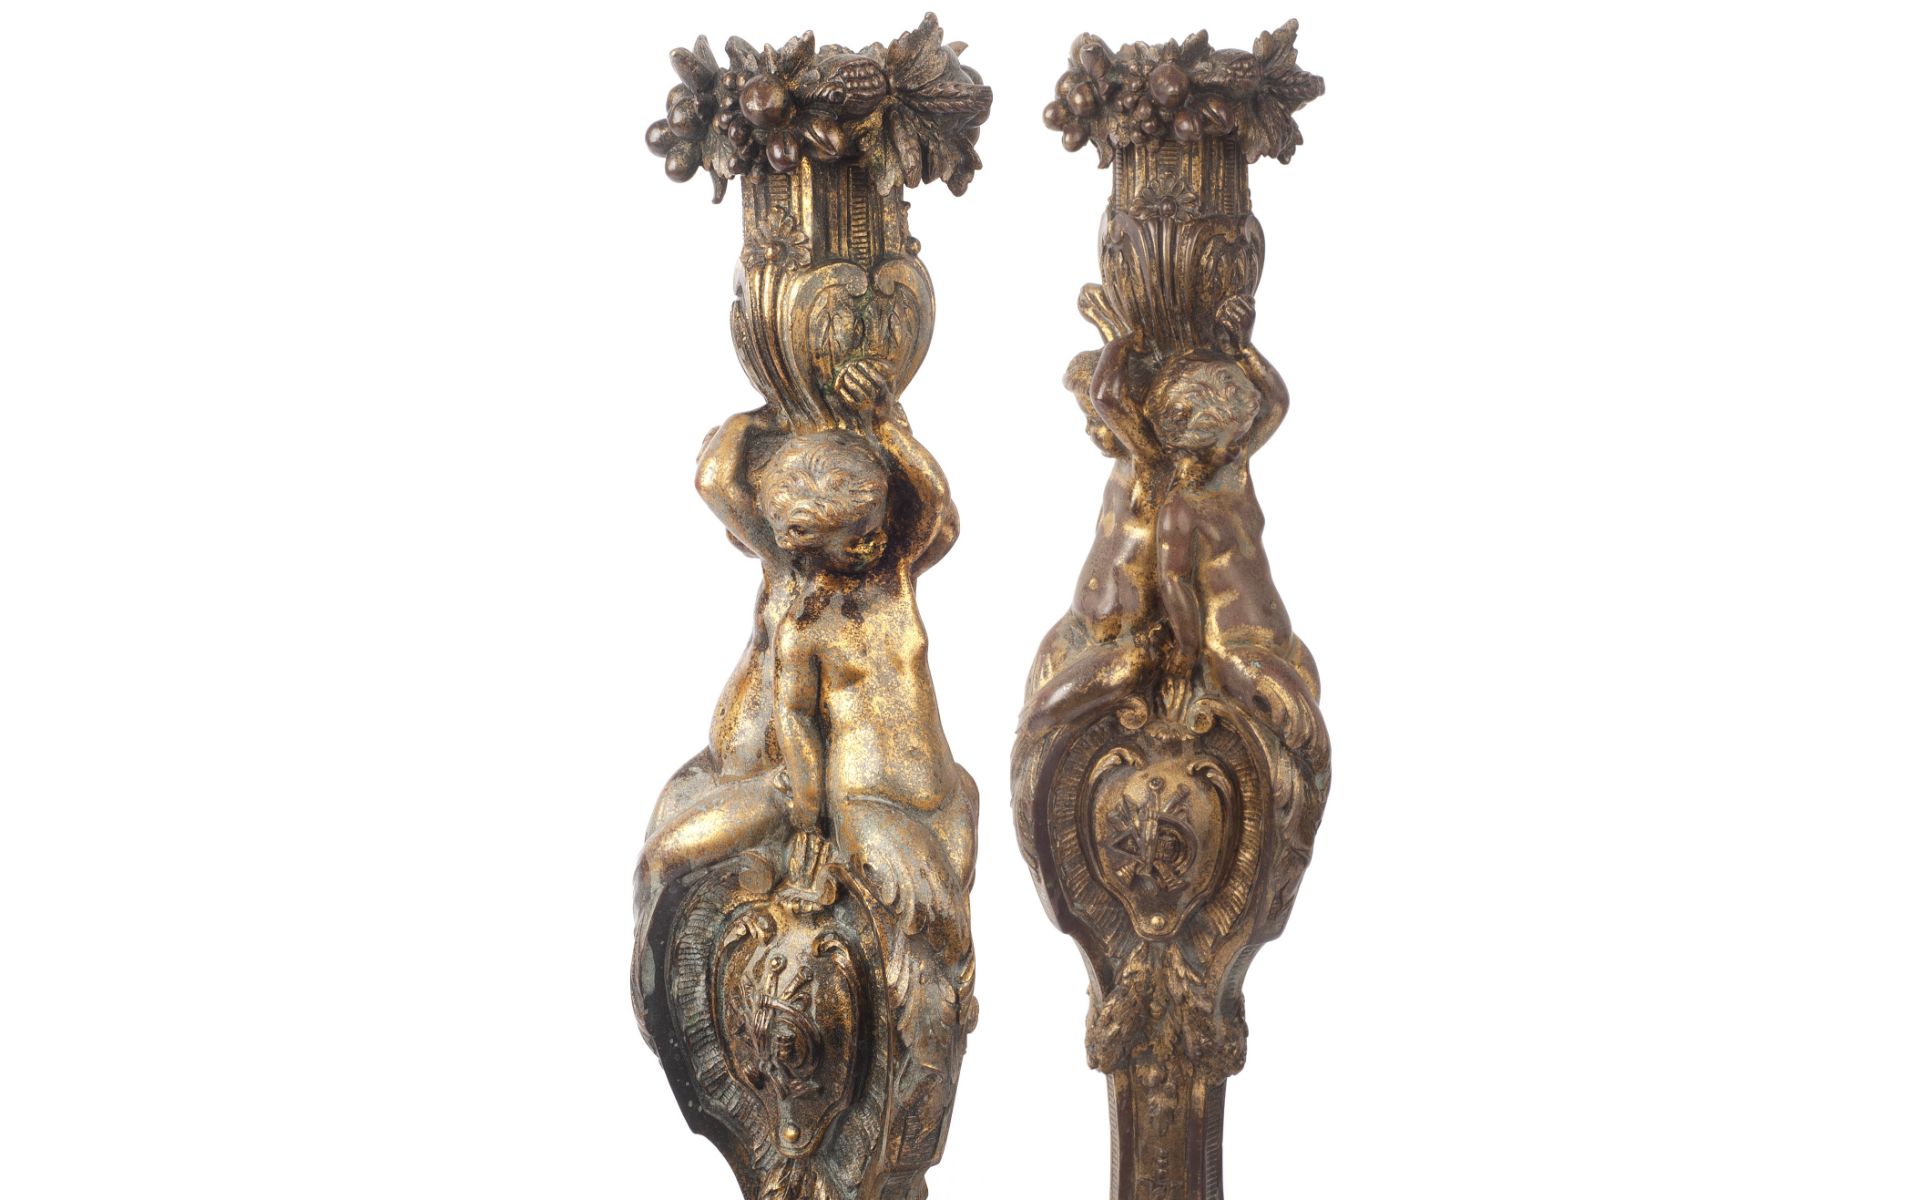 AFTER JUSTE-AURELE MEISSONNIER (1695-1750): A PAIR OF 19TH CENTURY GILT BRONZE LAMP BASES - Image 3 of 3